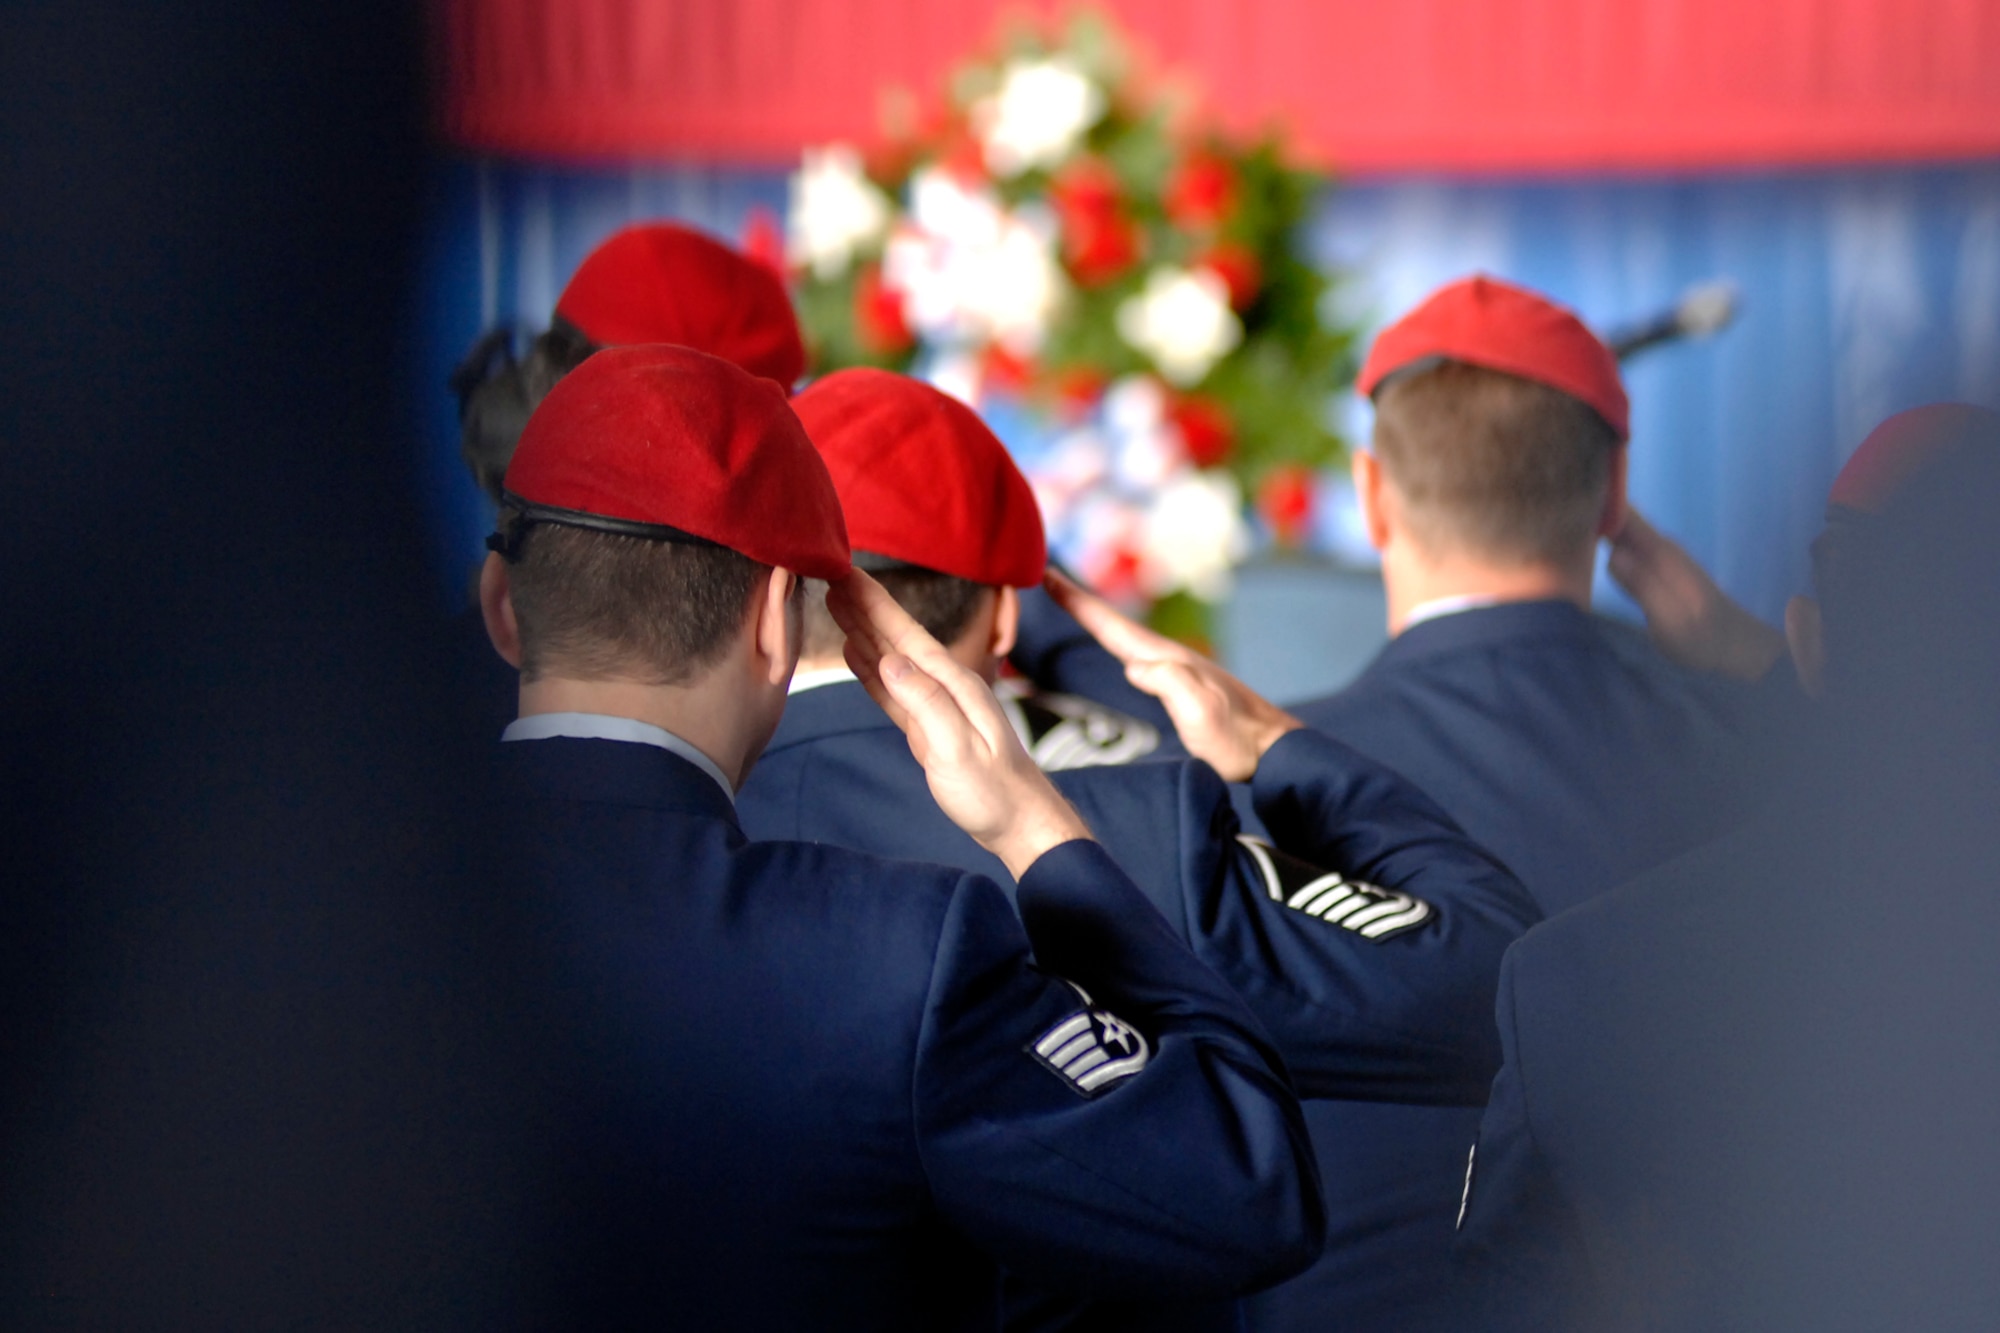 Mourners look on during the memorial ceremony for Tech. Sgt. William Jefferson Jr., 21st Special Tactics Squadron, at Hangar 4 on Pope Air Force Base March 26. Sergeant Jefferson died in support of Operation Enduring Freedom March 22. (U.S. Air Force Photo by Mike Murchison)